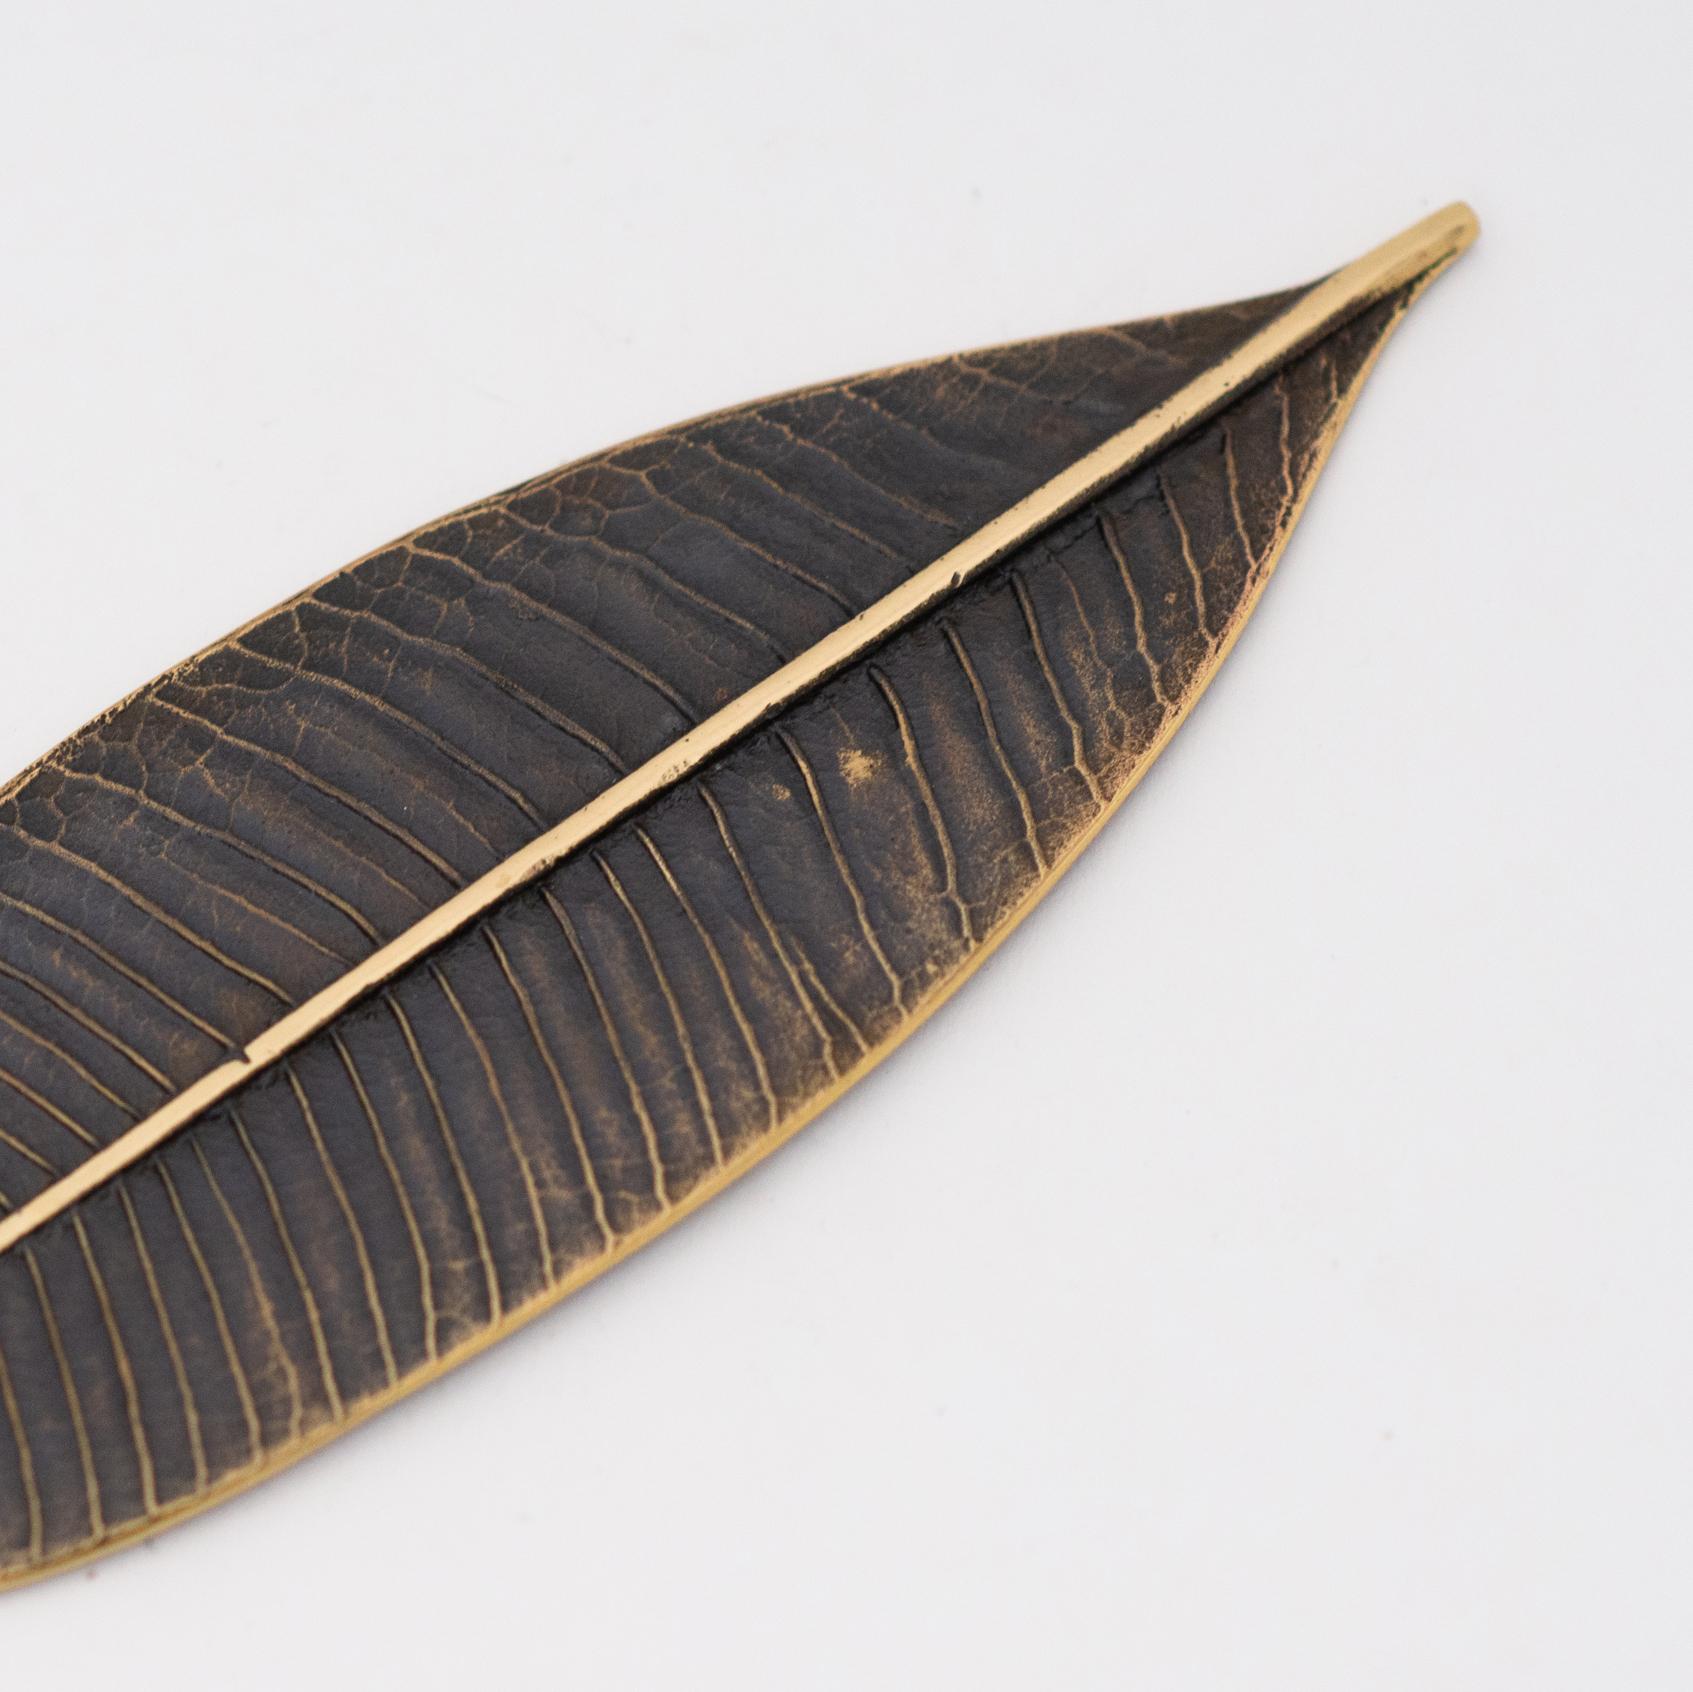 Handmade cast brass leaf with stunning details, a beautiful bronze patina finish and polished highlights. Ideal as an elegant paperweight or just a charming decorative object.

Each of those leaves are cast using very traditional techniques. Slight